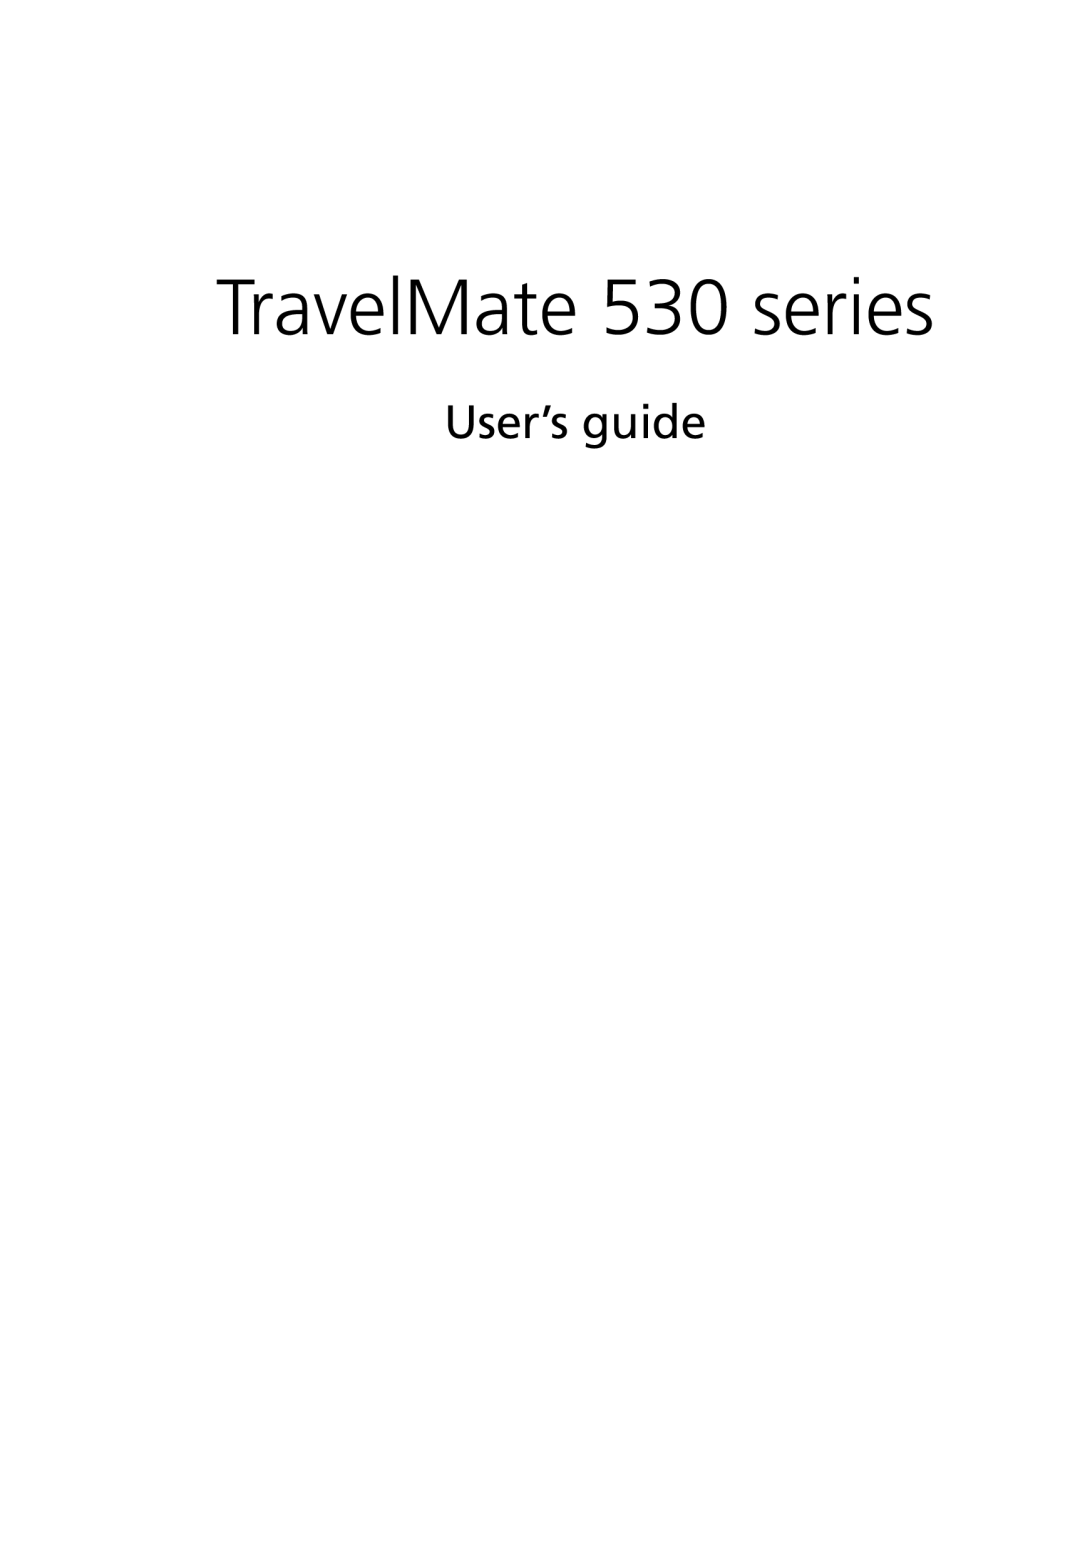 Acer manual TravelMate 530 series, User’s guide 